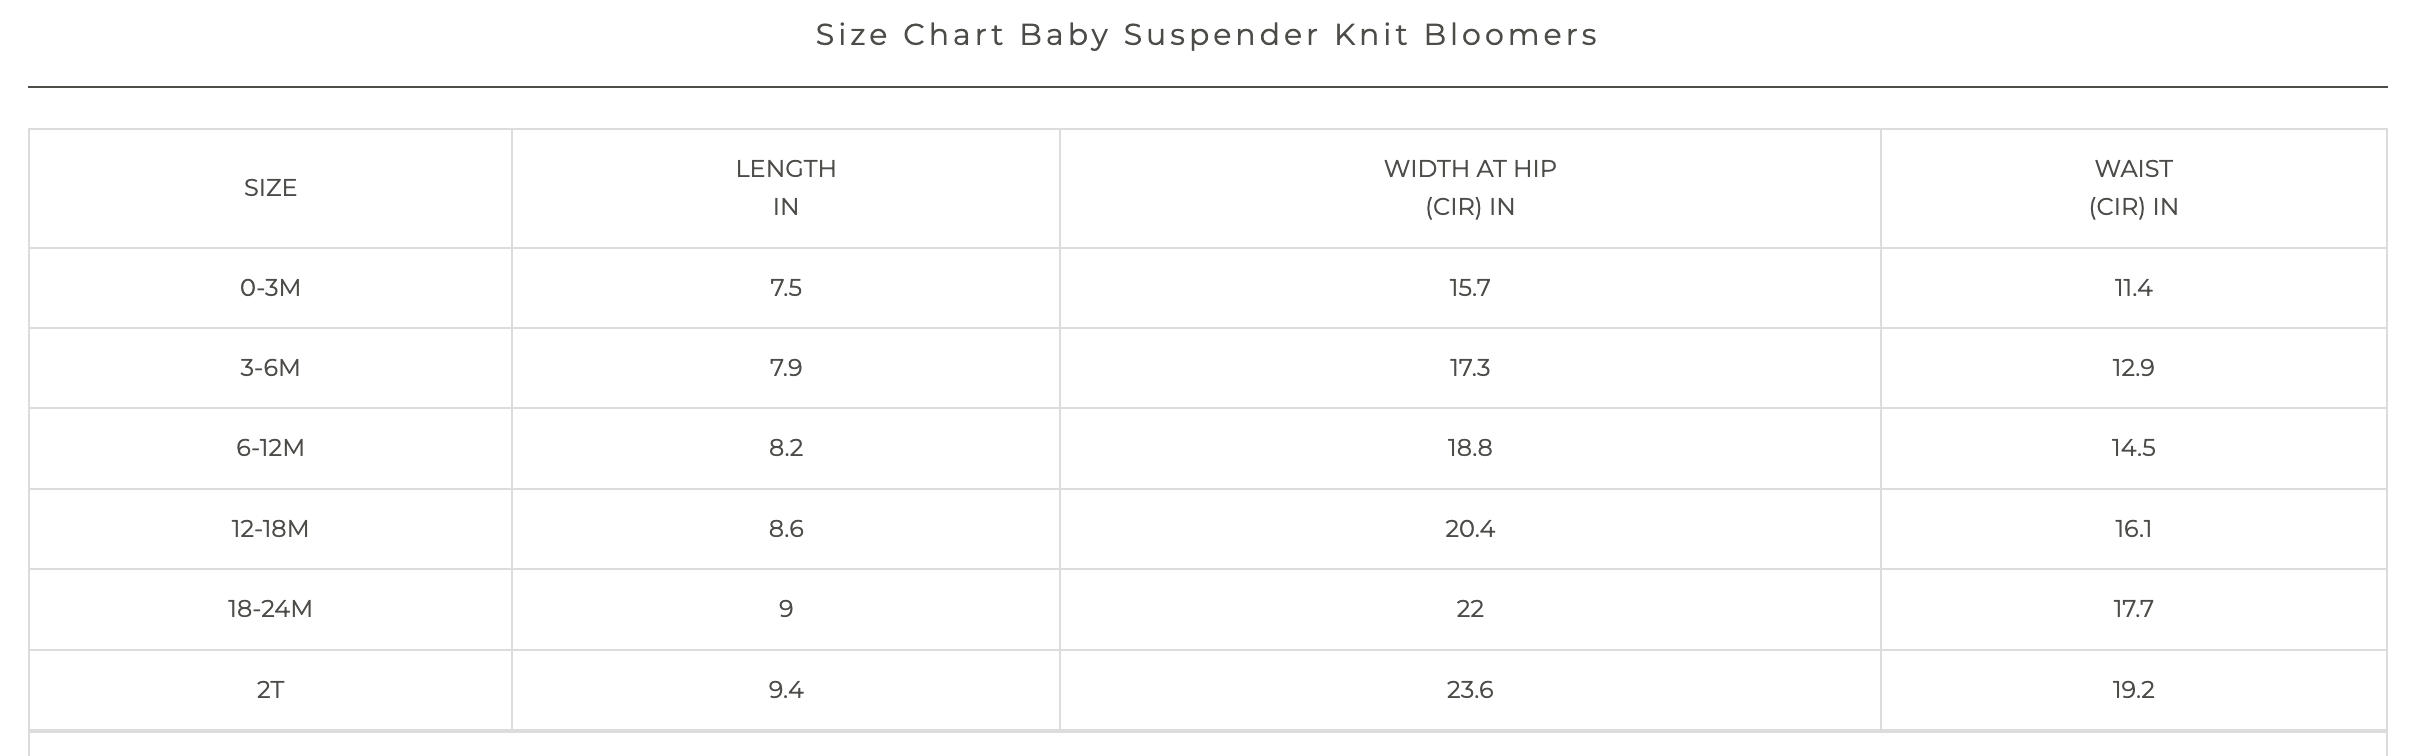 KNIT SUSPENDER BLOOMERS | SHELL